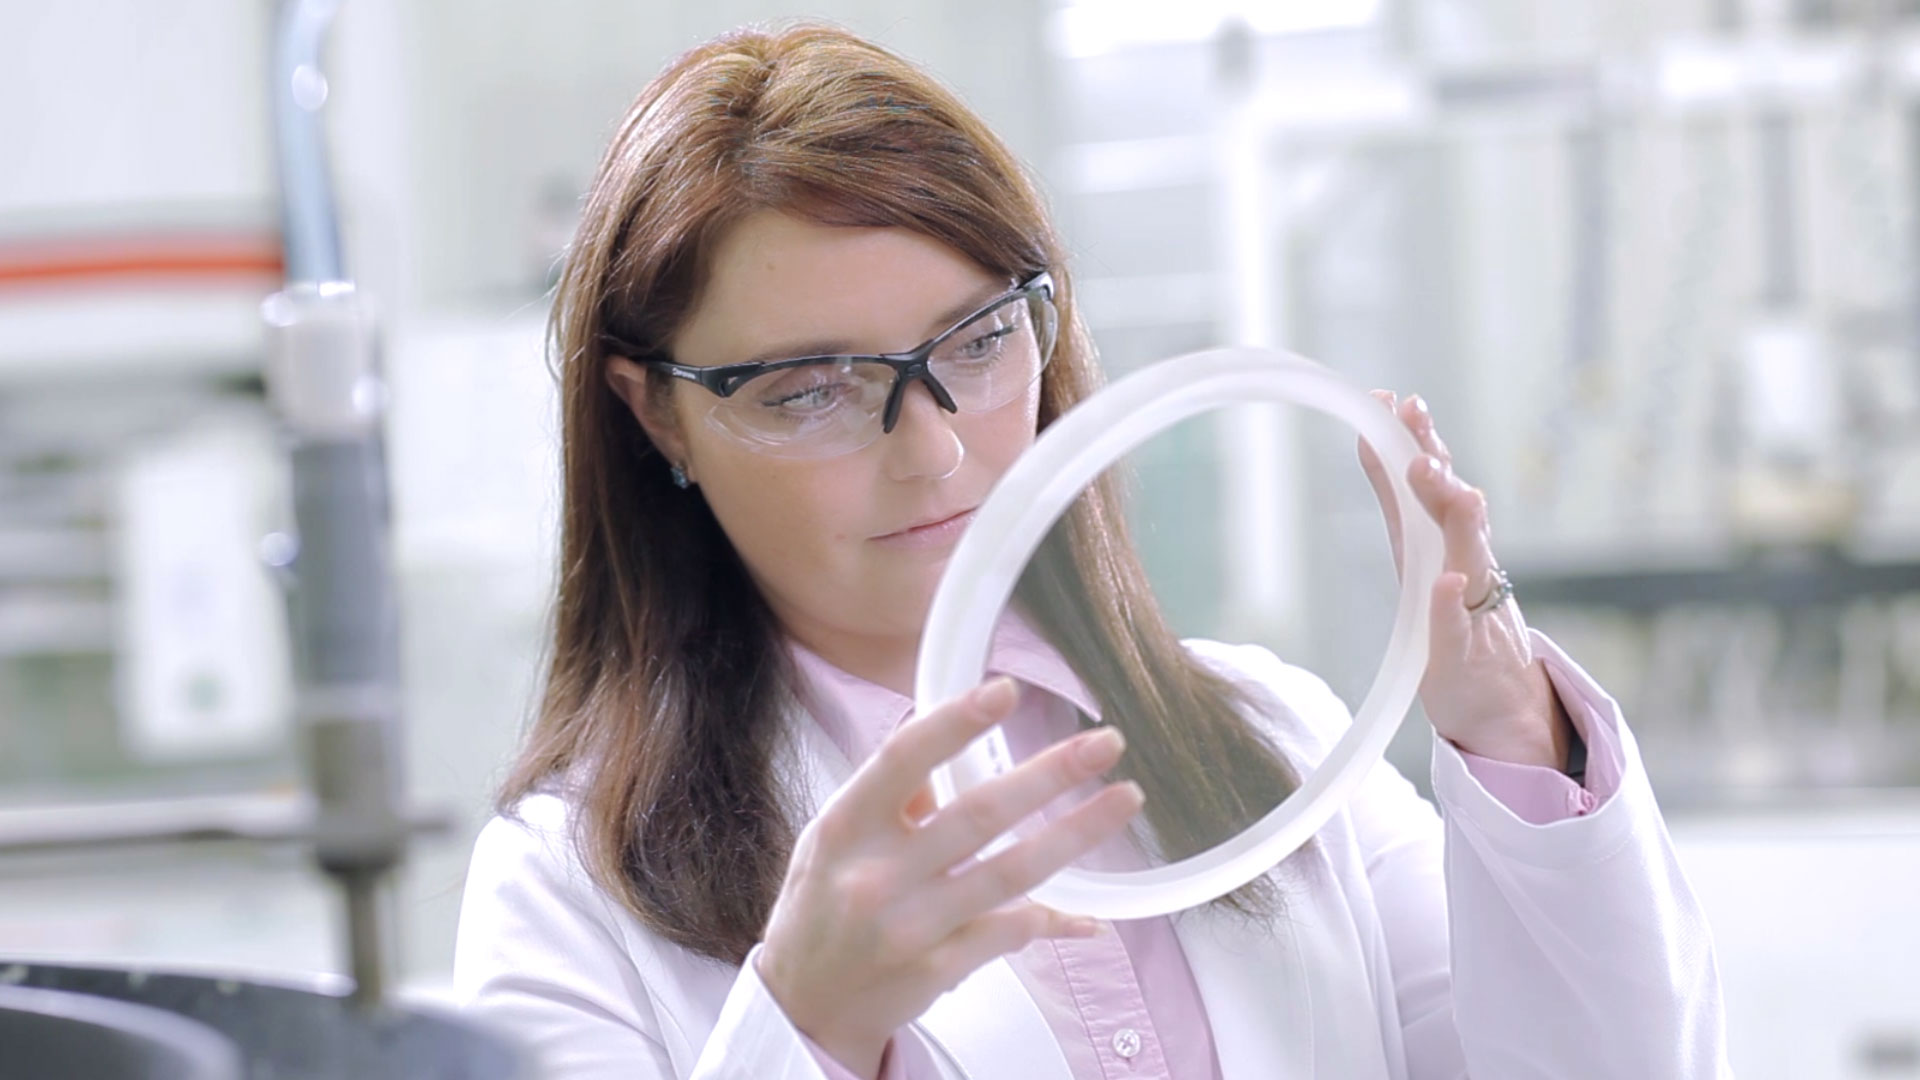 Female scientist examining a large circular sight glass in a laboratory